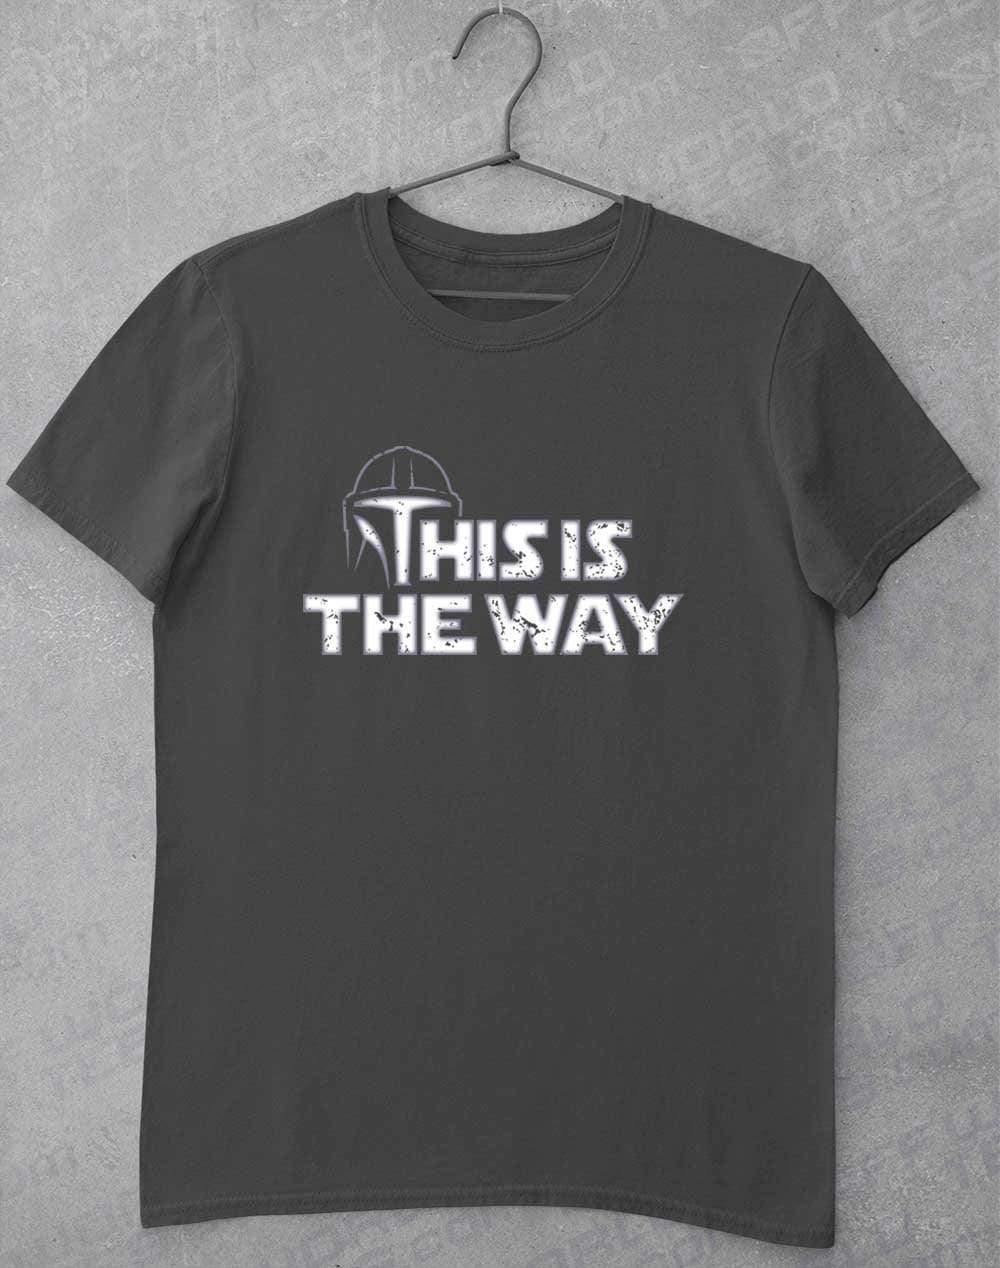 This is the Way - T-Shirt S / Charcoal  - Off World Tees